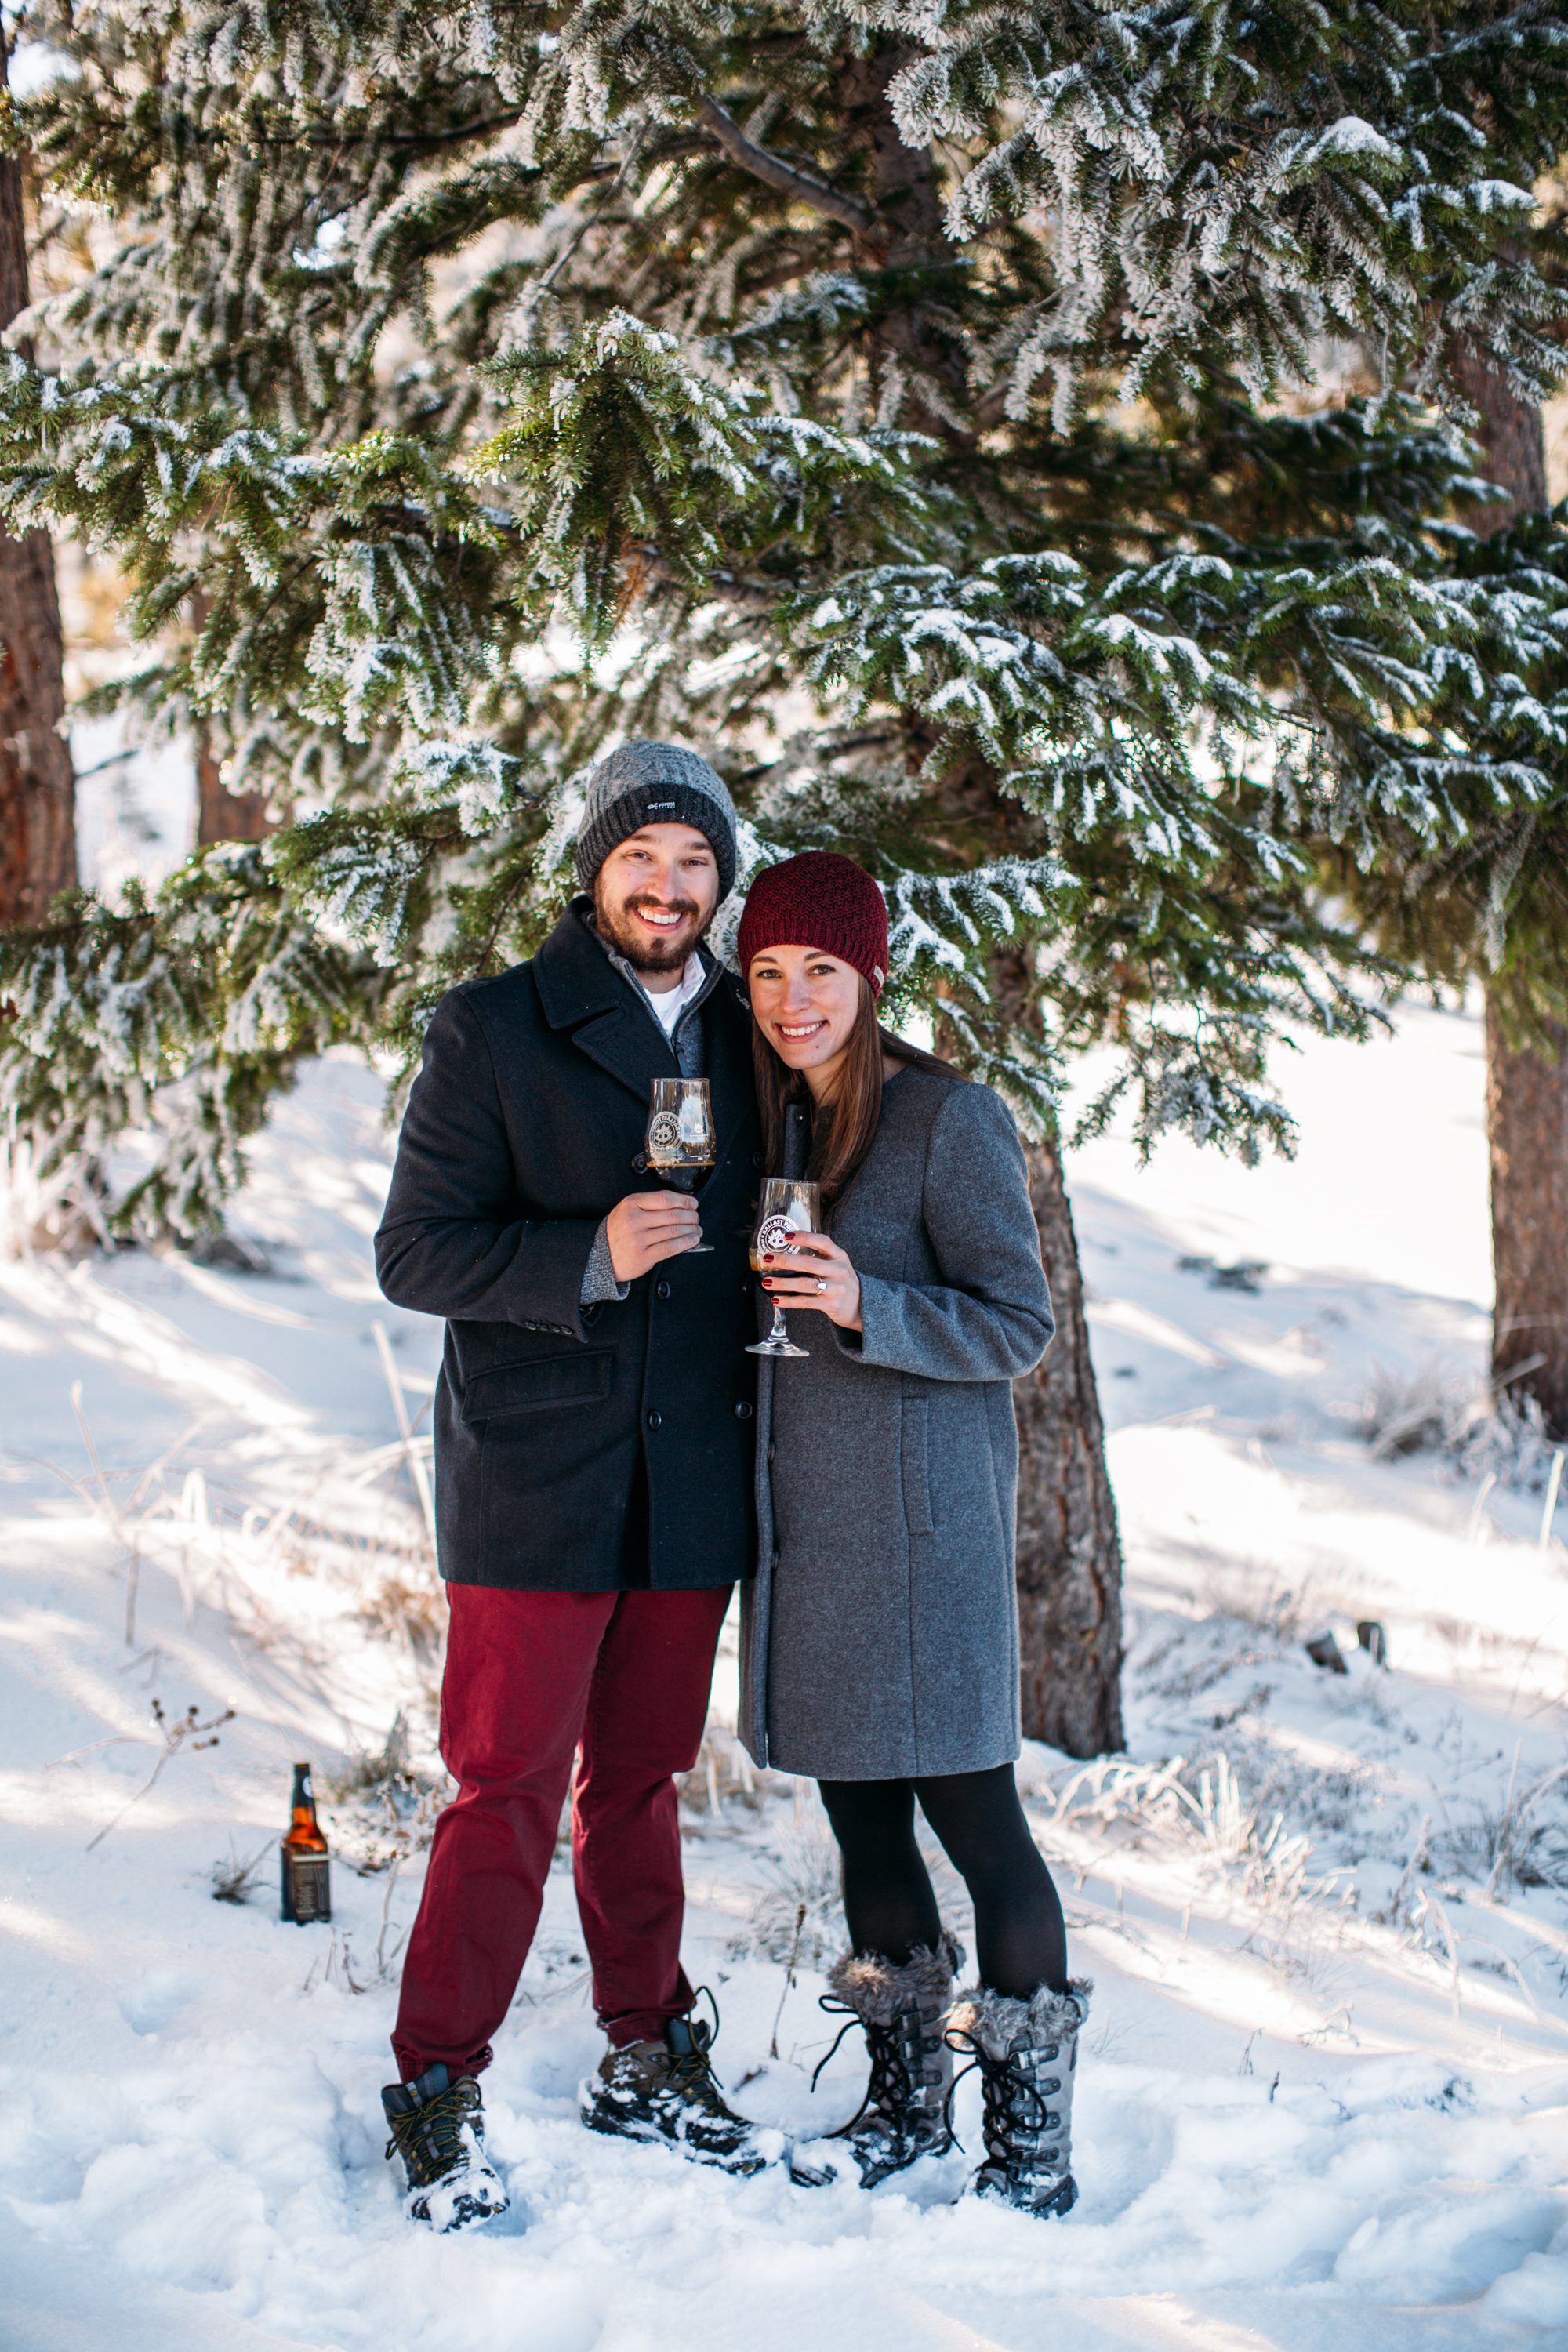 beer engagement session, lost gulch overlook, lost gulch overlook engagement, lost gulch overlook boulder, winter engagement session, winter engagement photos, cute engagement photos, snowy engagement photos, colorado engagement, colorado engagement photographer, denver engagement photographer, cold weather engagement photos, couples photo posing, engagement photo posing